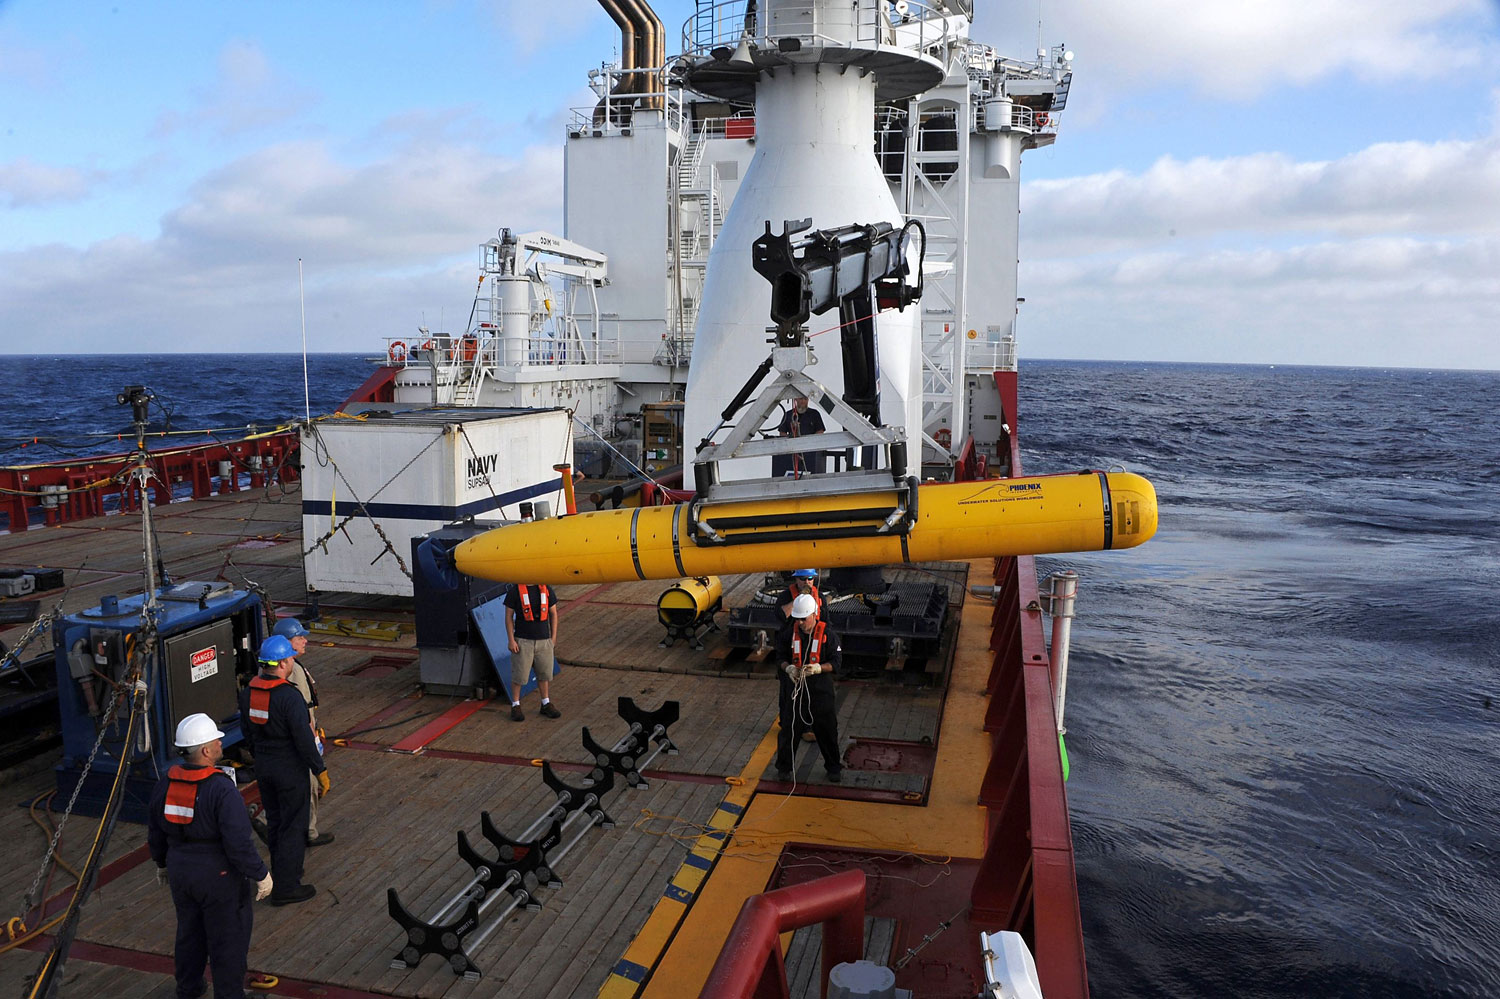 Crew aboard the Australian Defence Vessel Ocean Shield move the U.S. Navyís Bluefin-21 into position for deployment, in the southern Indian Ocean to look for the missing Malaysian Airlines flight MH370